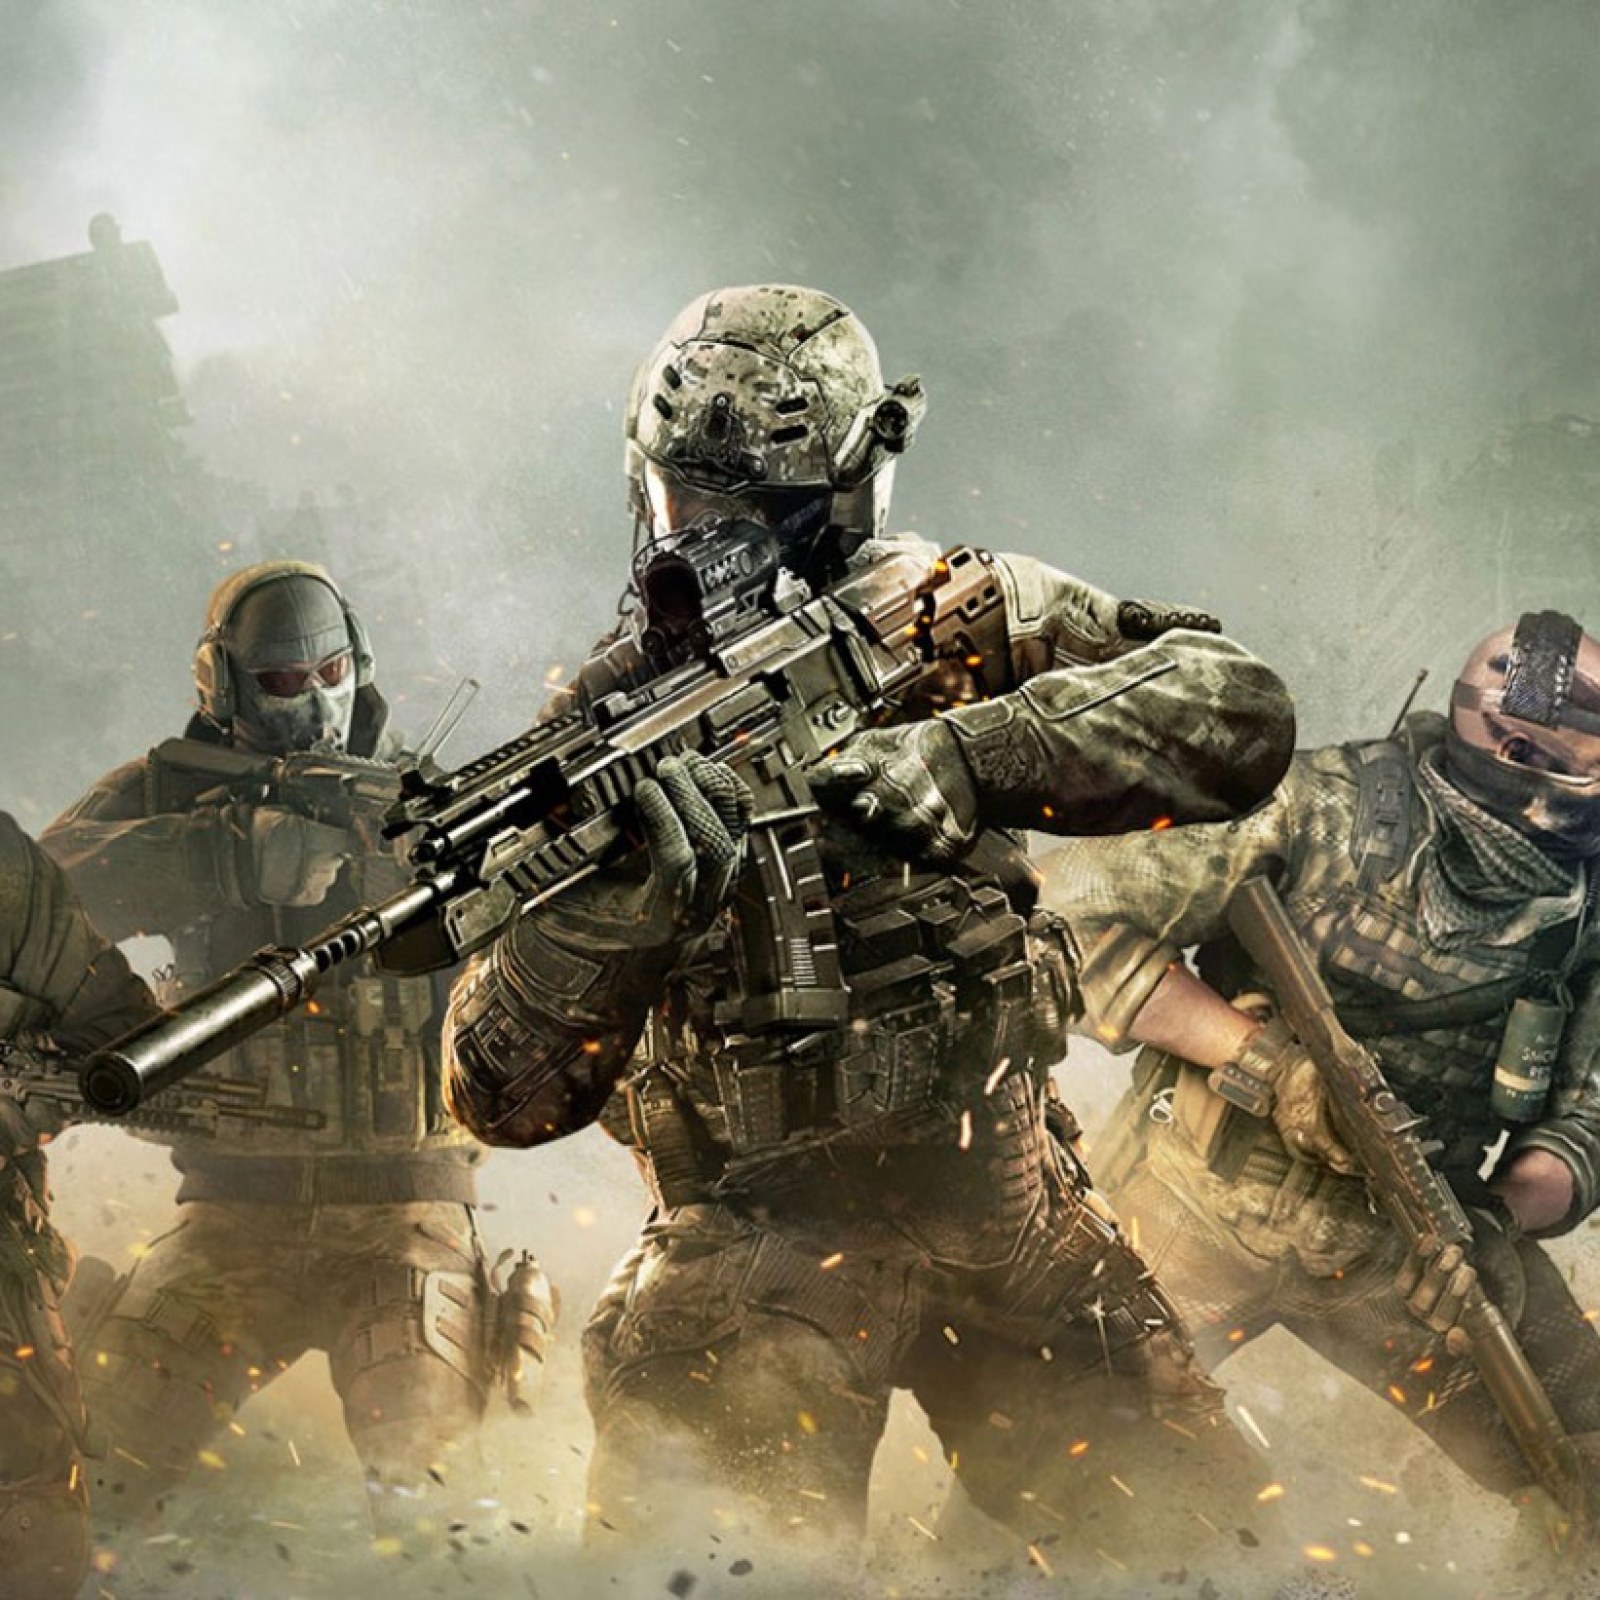 Call of Duty Mobile Community Update Teases Zombies Mode and Controller  Support - mxdwn Games